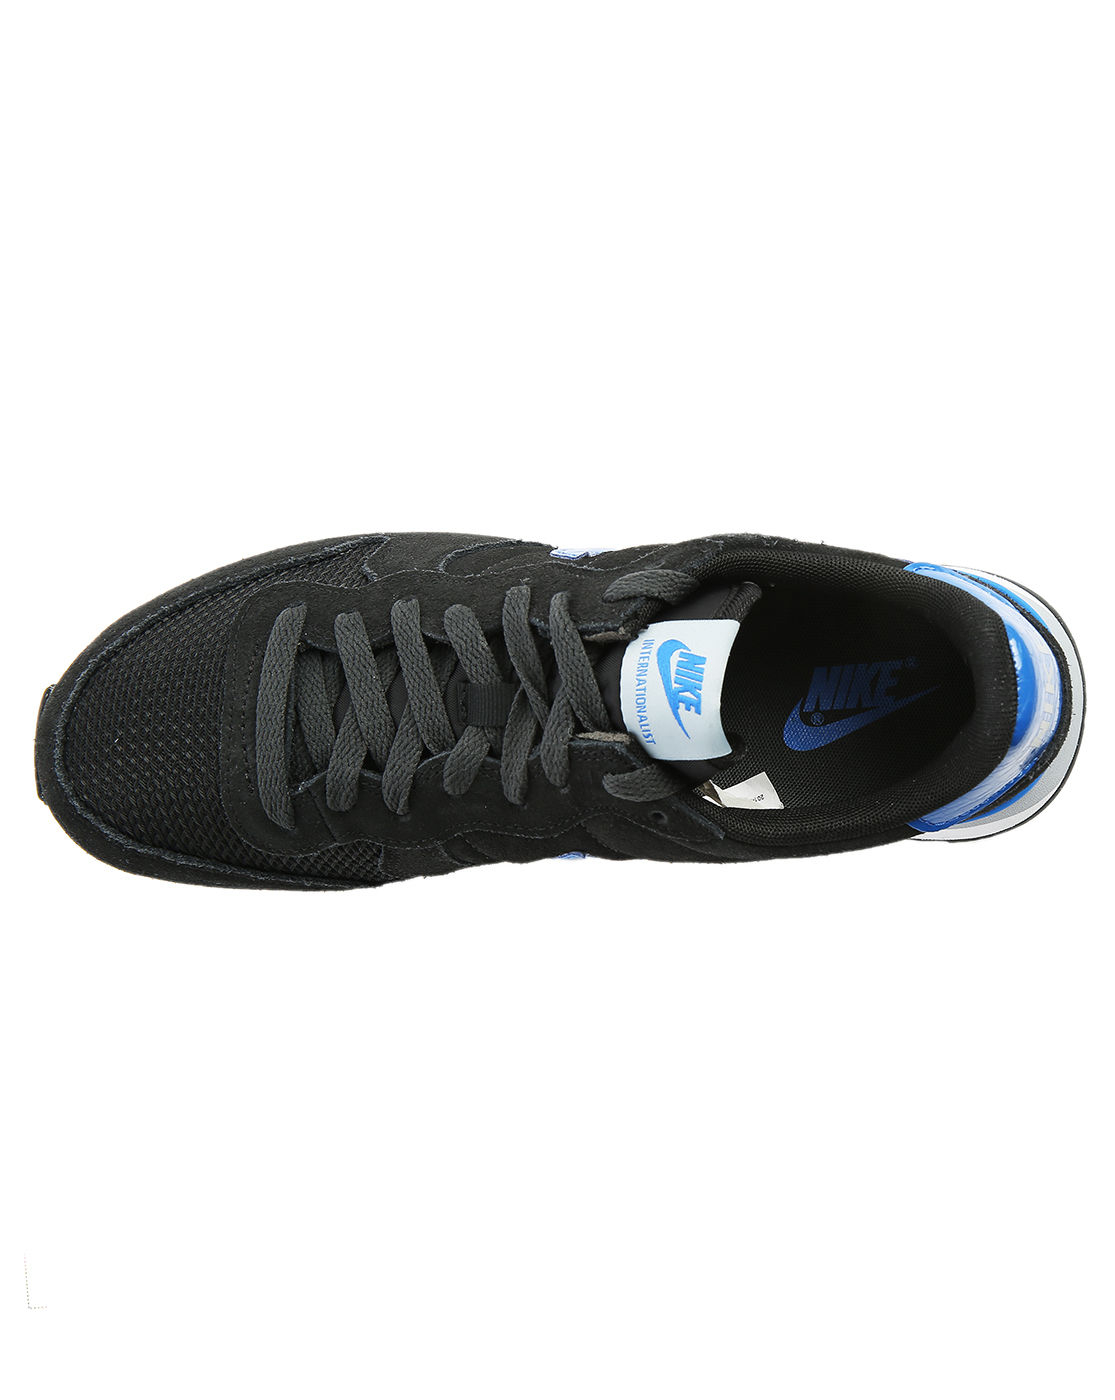 Nike Suede And Mesh Black Internationalist Sneakers With Patent Blue ...